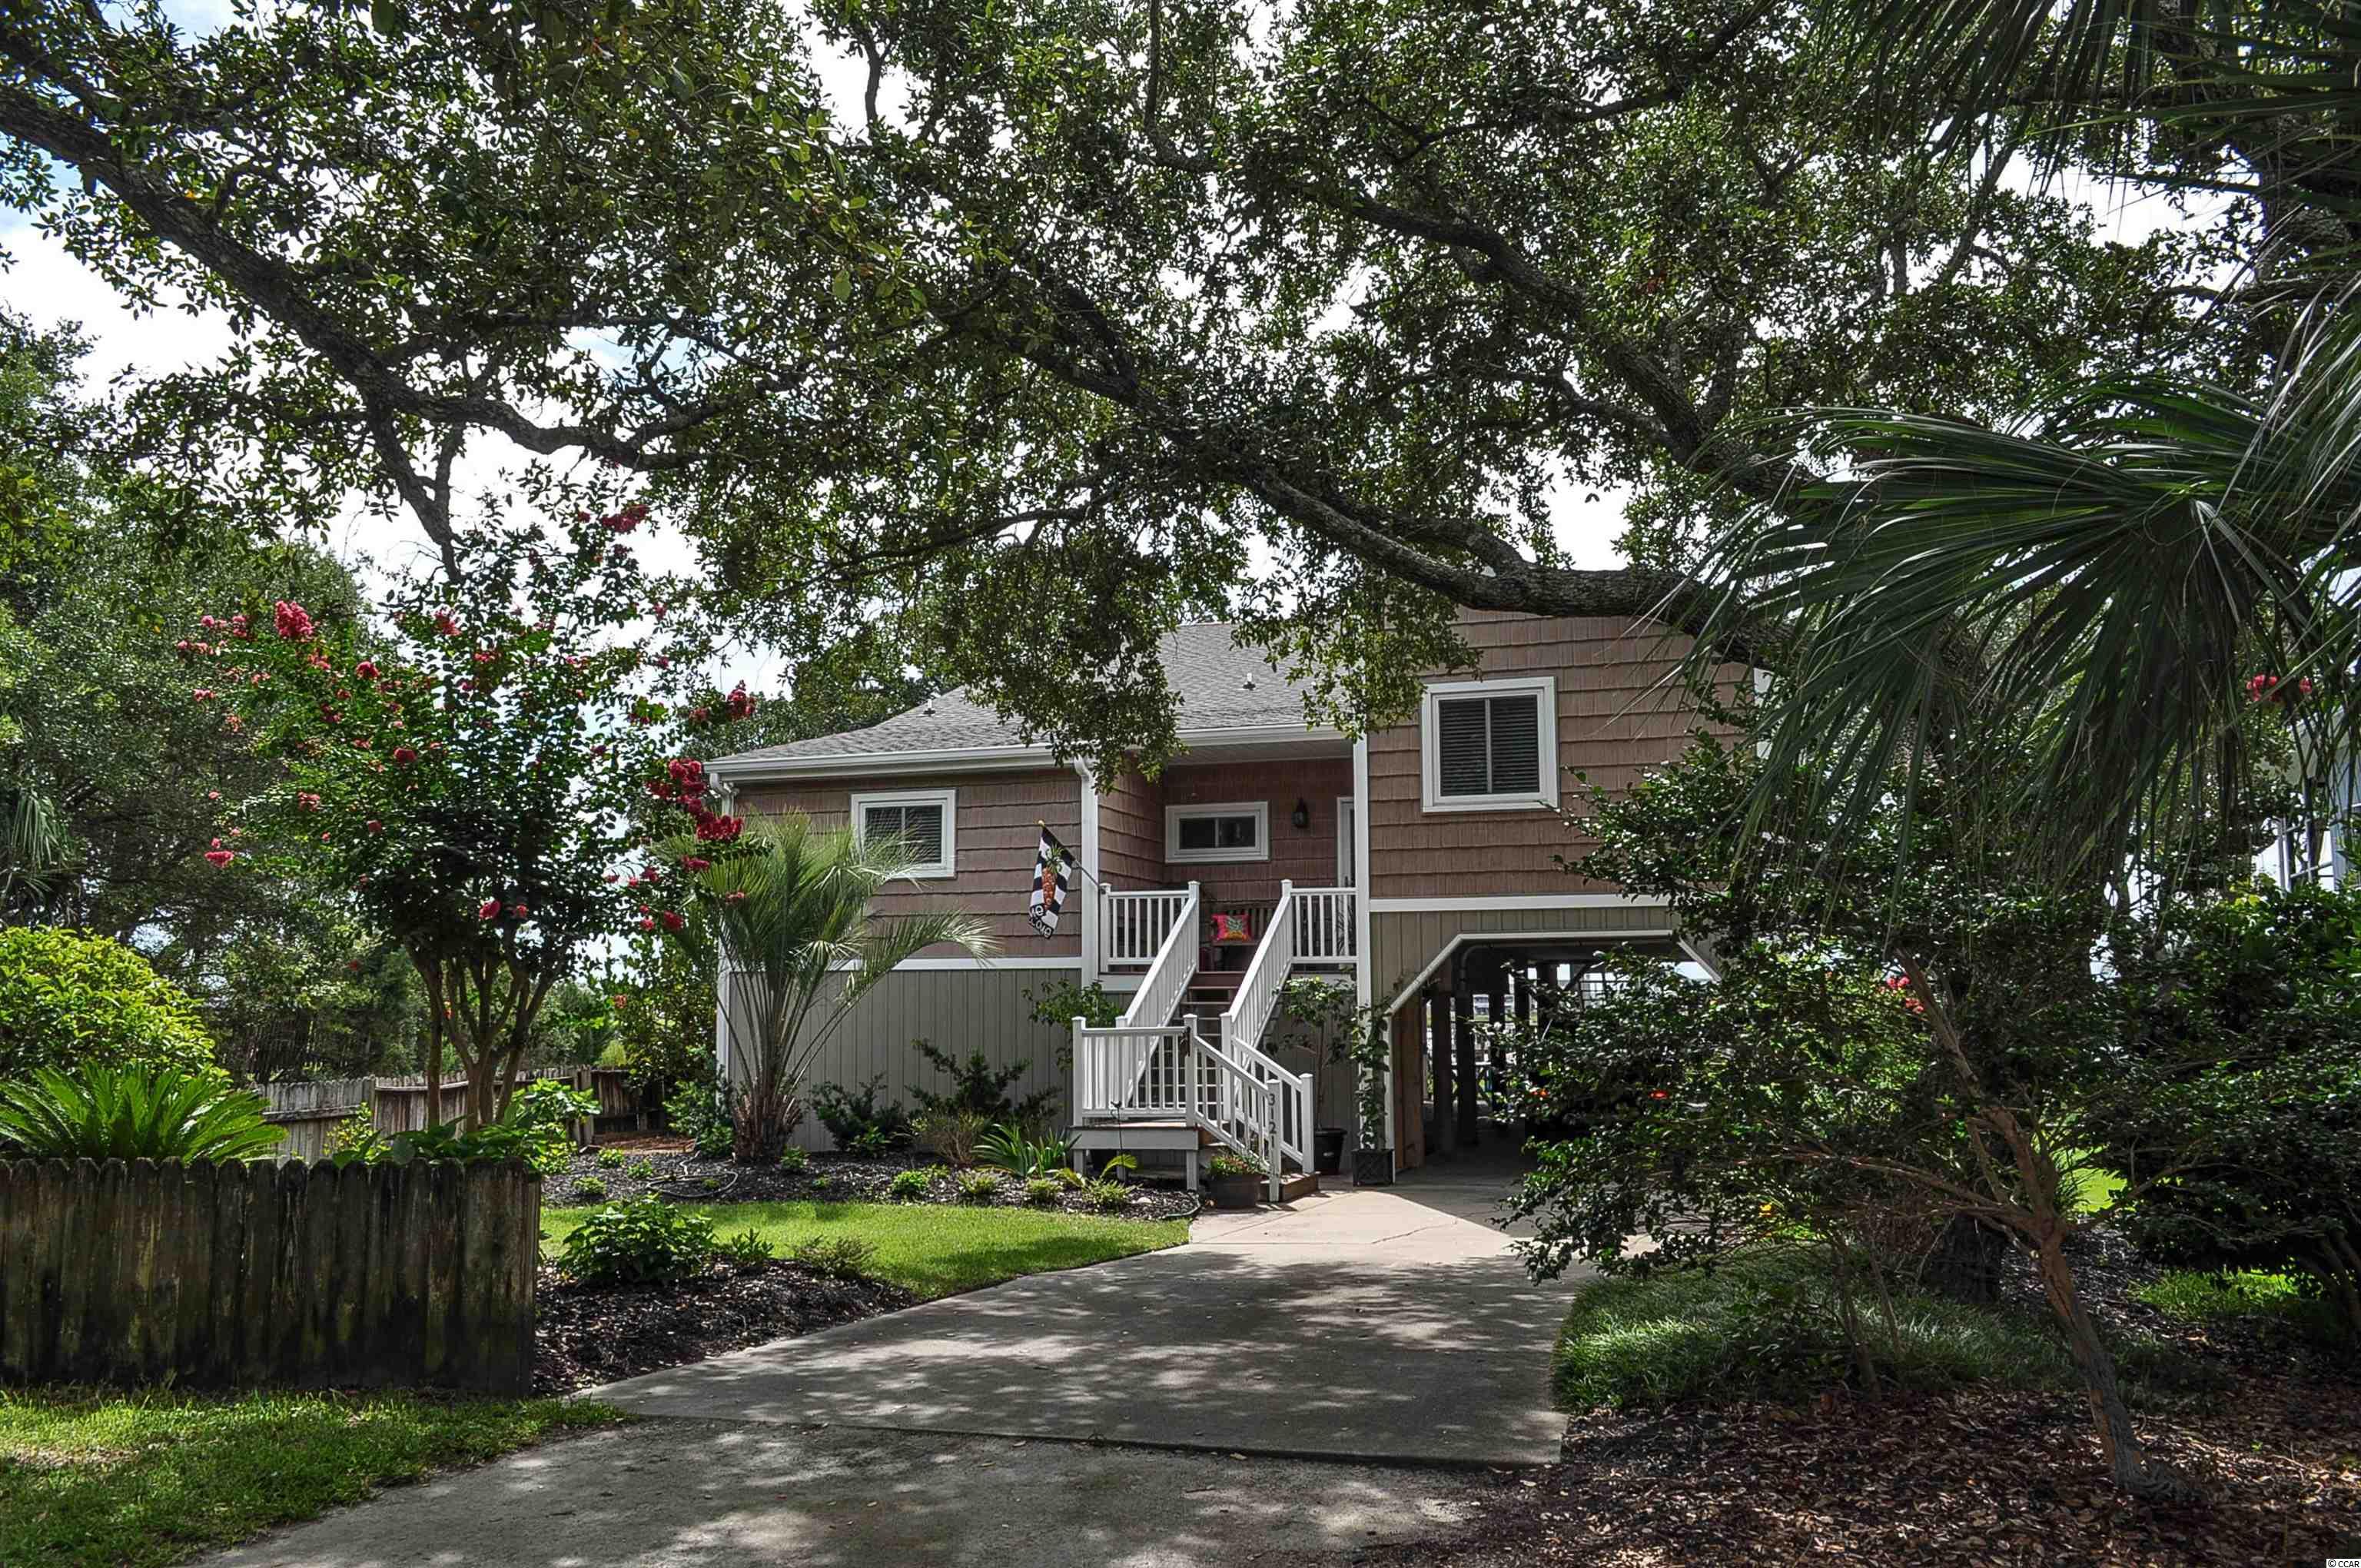 3121 1st Ave. S Murrells Inlet, SC 29576